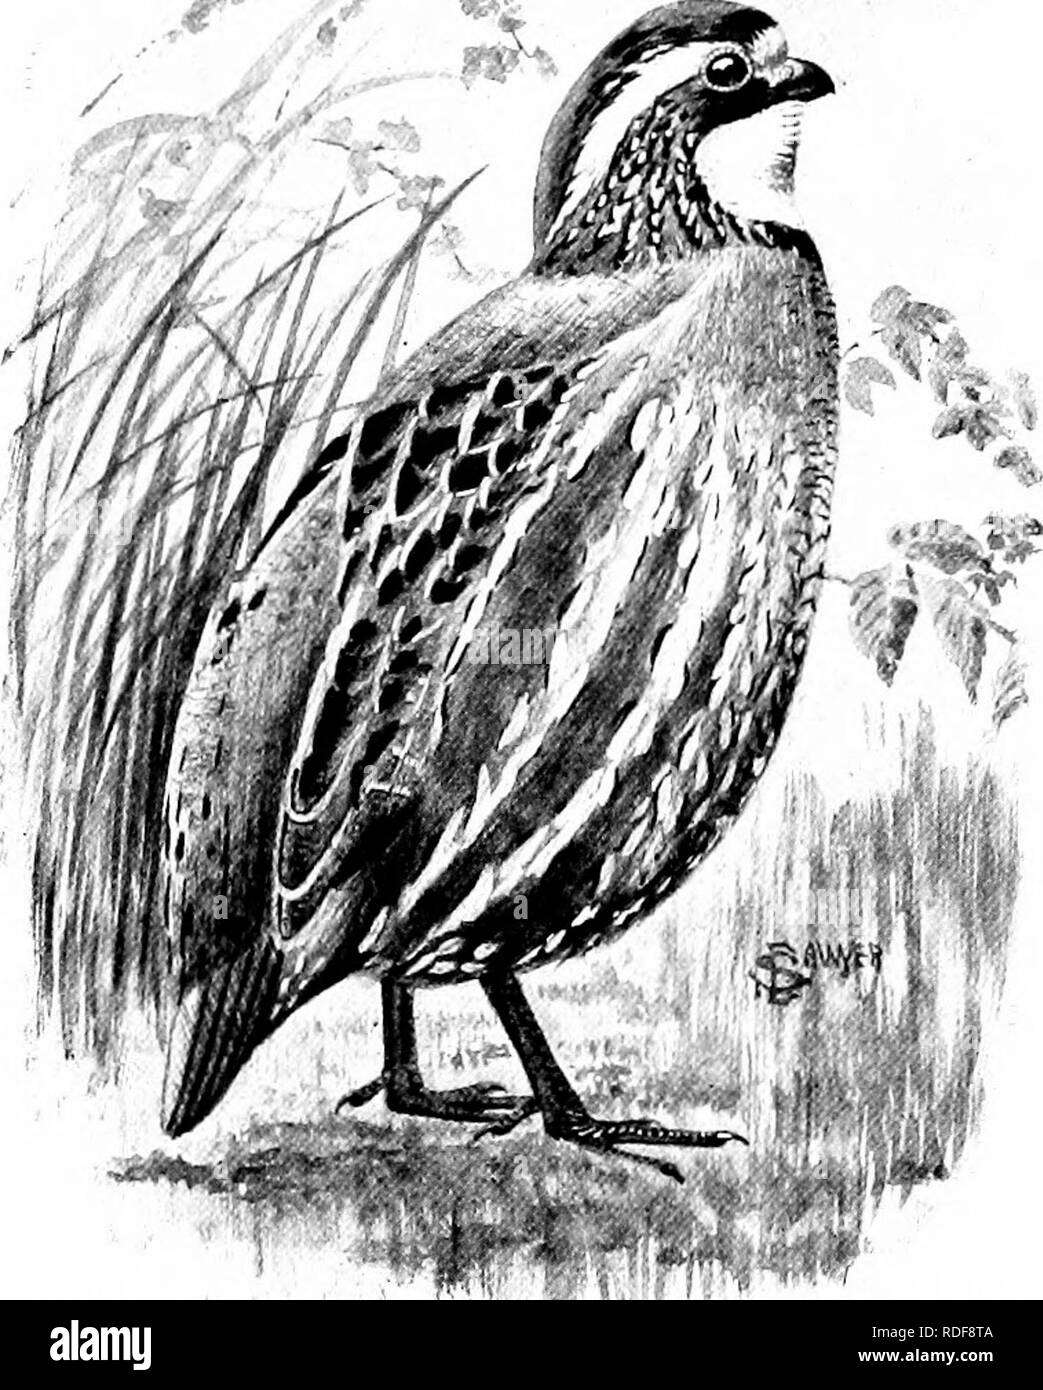 . The American natural history; a foundation of useful knowledge of the higher animals of North America. Natural history. 242 OEDERS OF BIKDS—UPLAND GAME-BIKDS. BOB-WHITE. As the preceding diagram shows, there are no true pheasants in America save those that have been introduced from China and Japan. All the birds to which that name correctly applies inhabit the Old World. THE GROUSE FAMILY. Tetraonidae. Our dear old friend the Common &quot; Quail&quot; is now called Bob-White ' in all the modern bird- books, but to about fifty million Americans it is yet, and ever will be, the Quail. It is ou Stock Photo